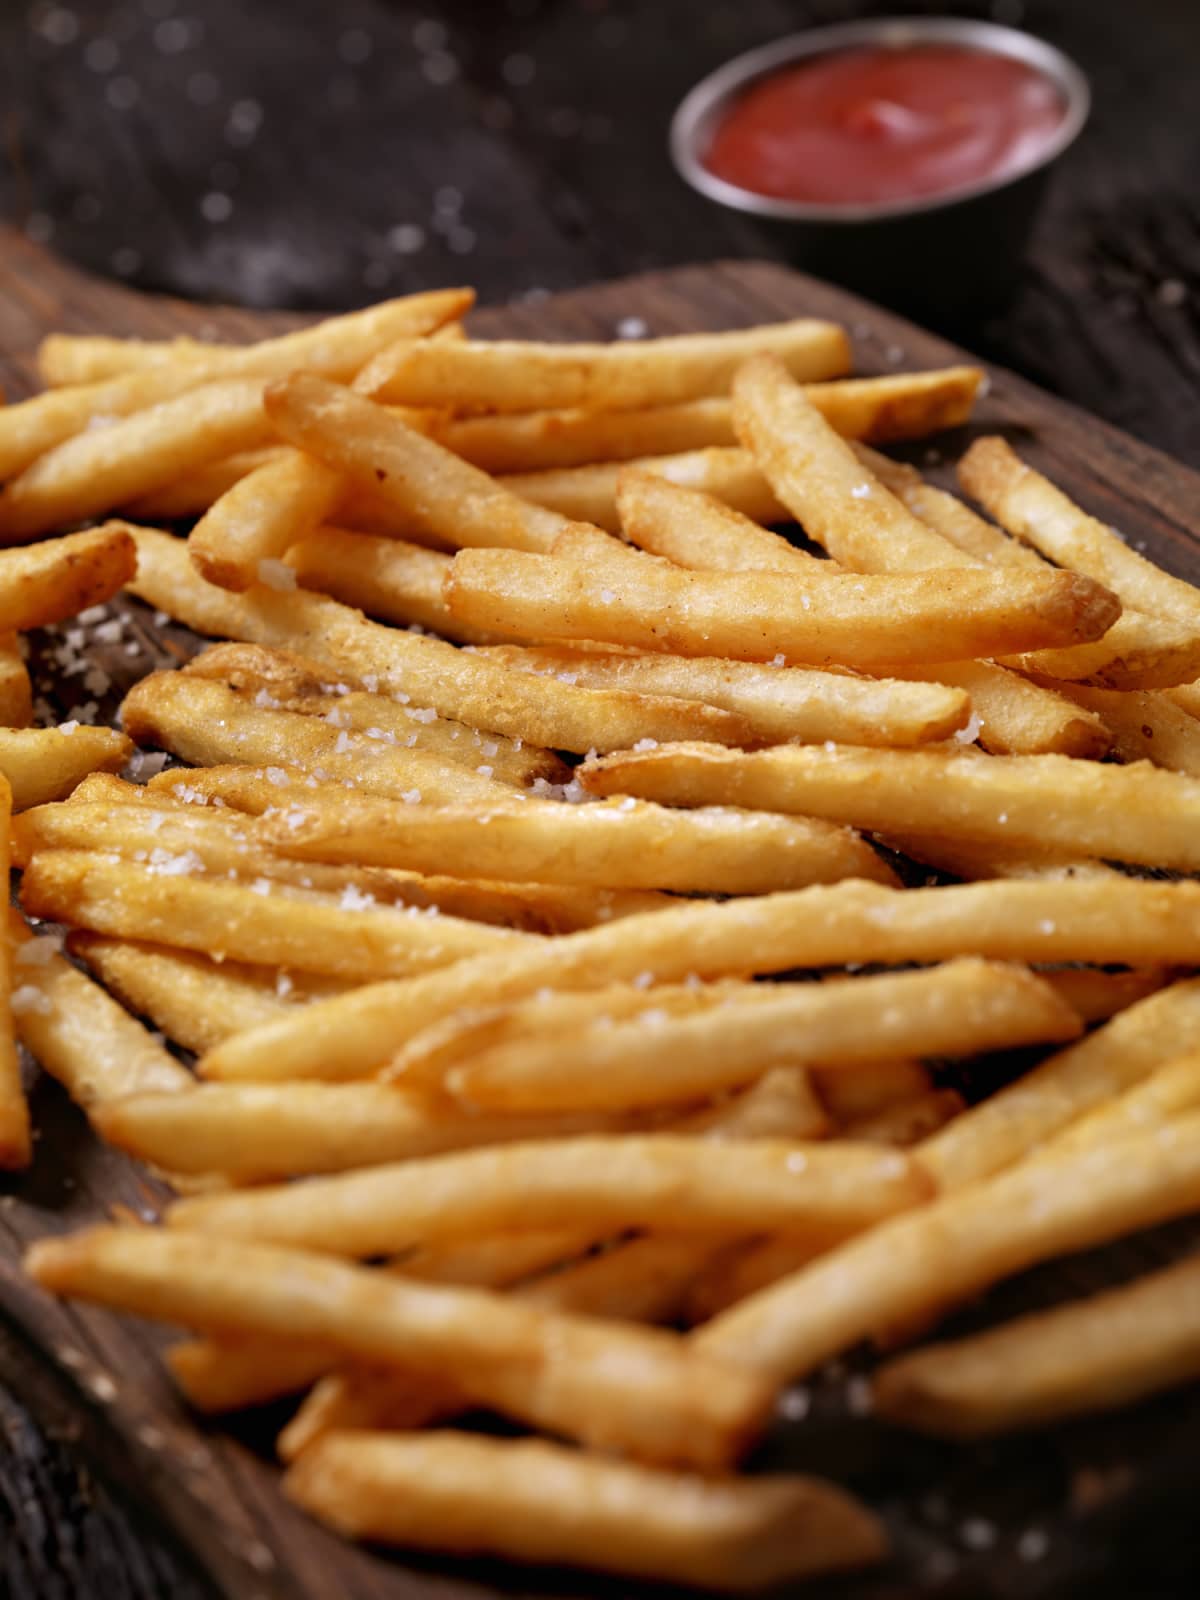 Salted french fries on cutting board